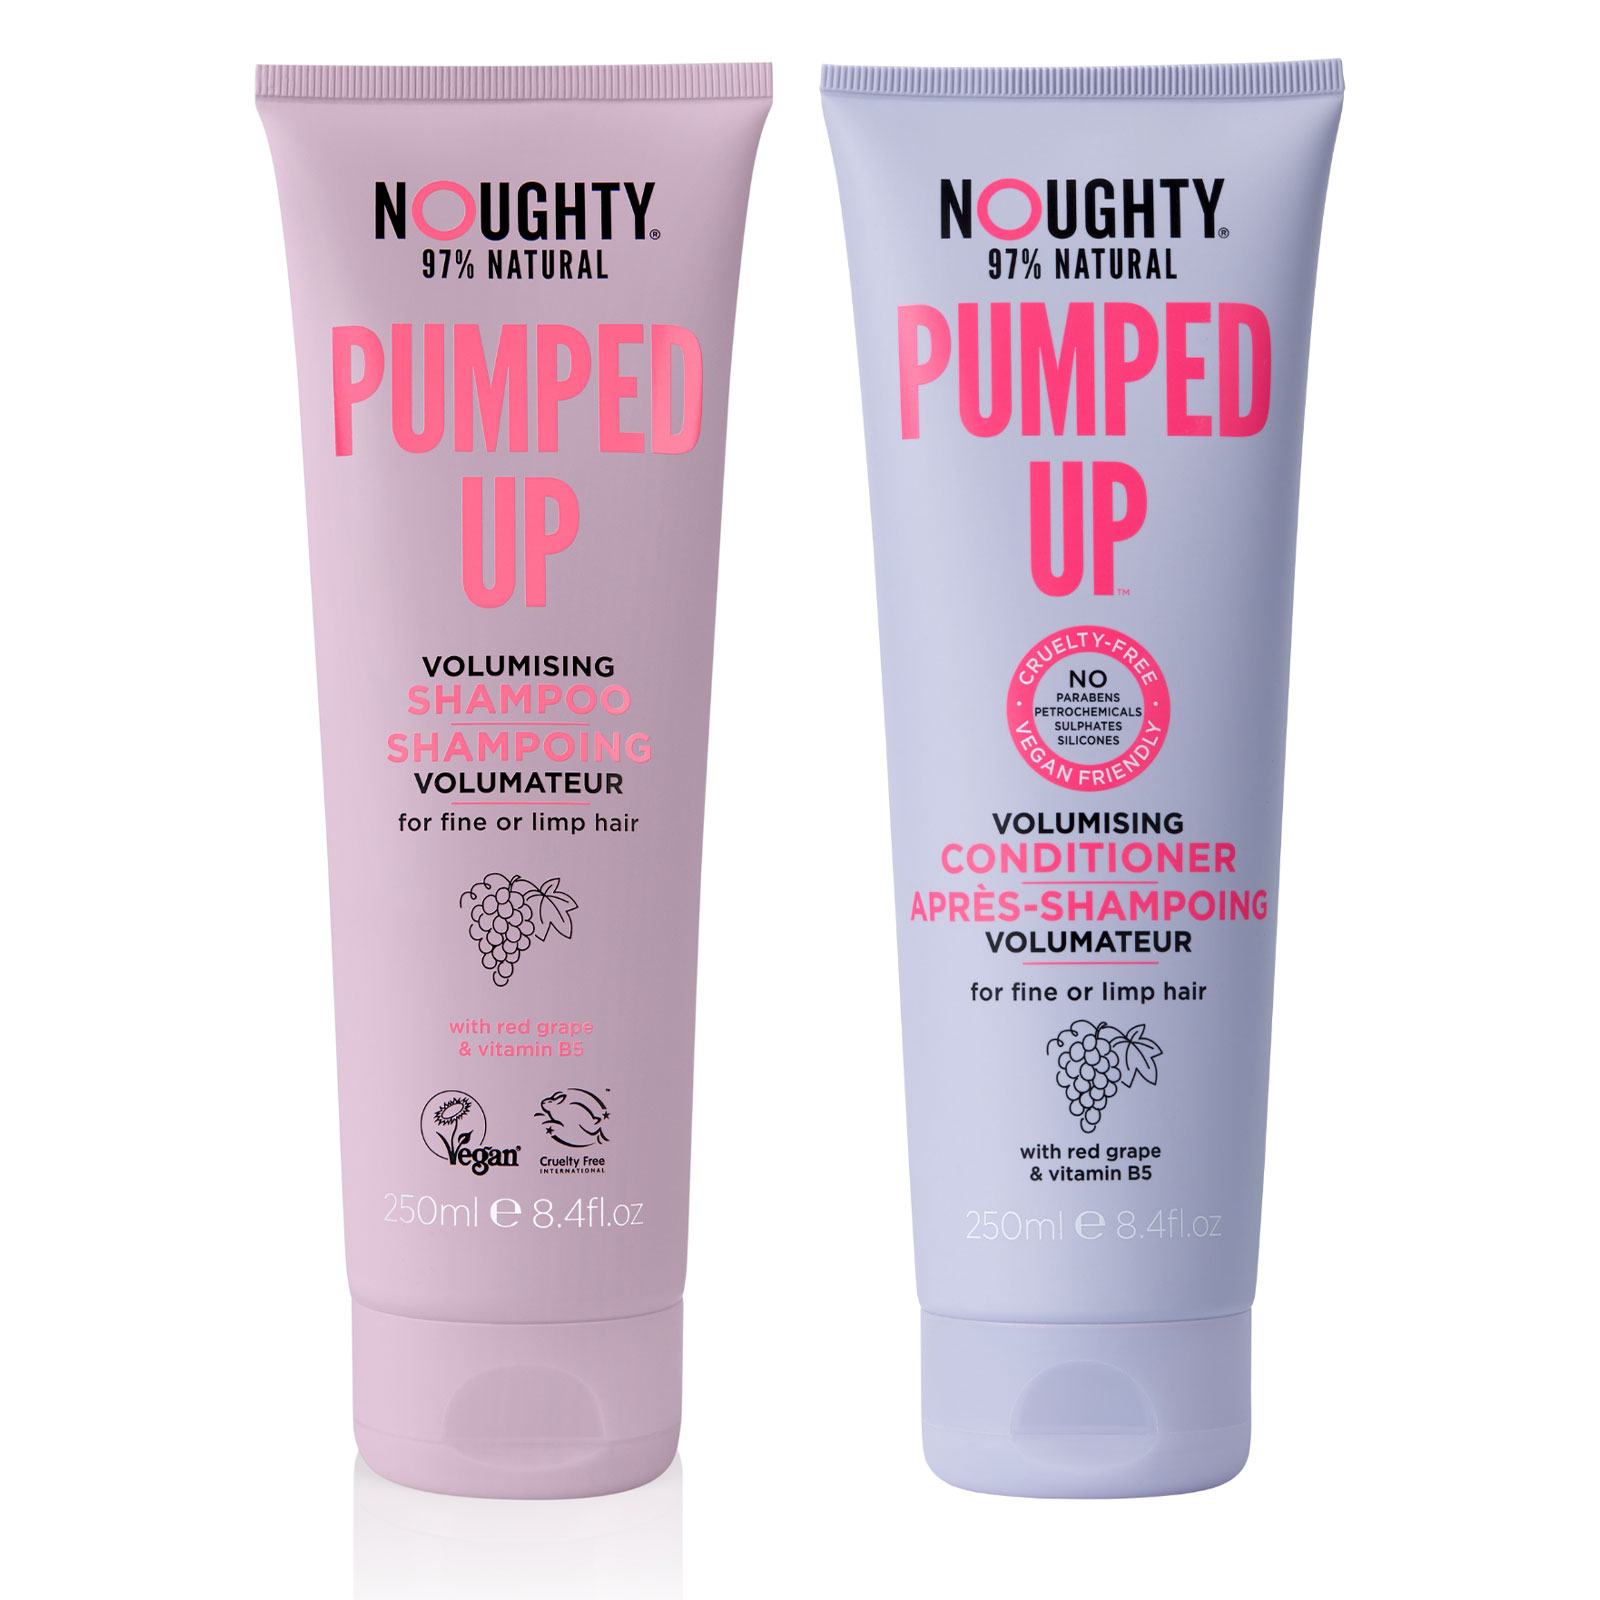 Noughty Pumped Up Shampoo & Conditioner Duo